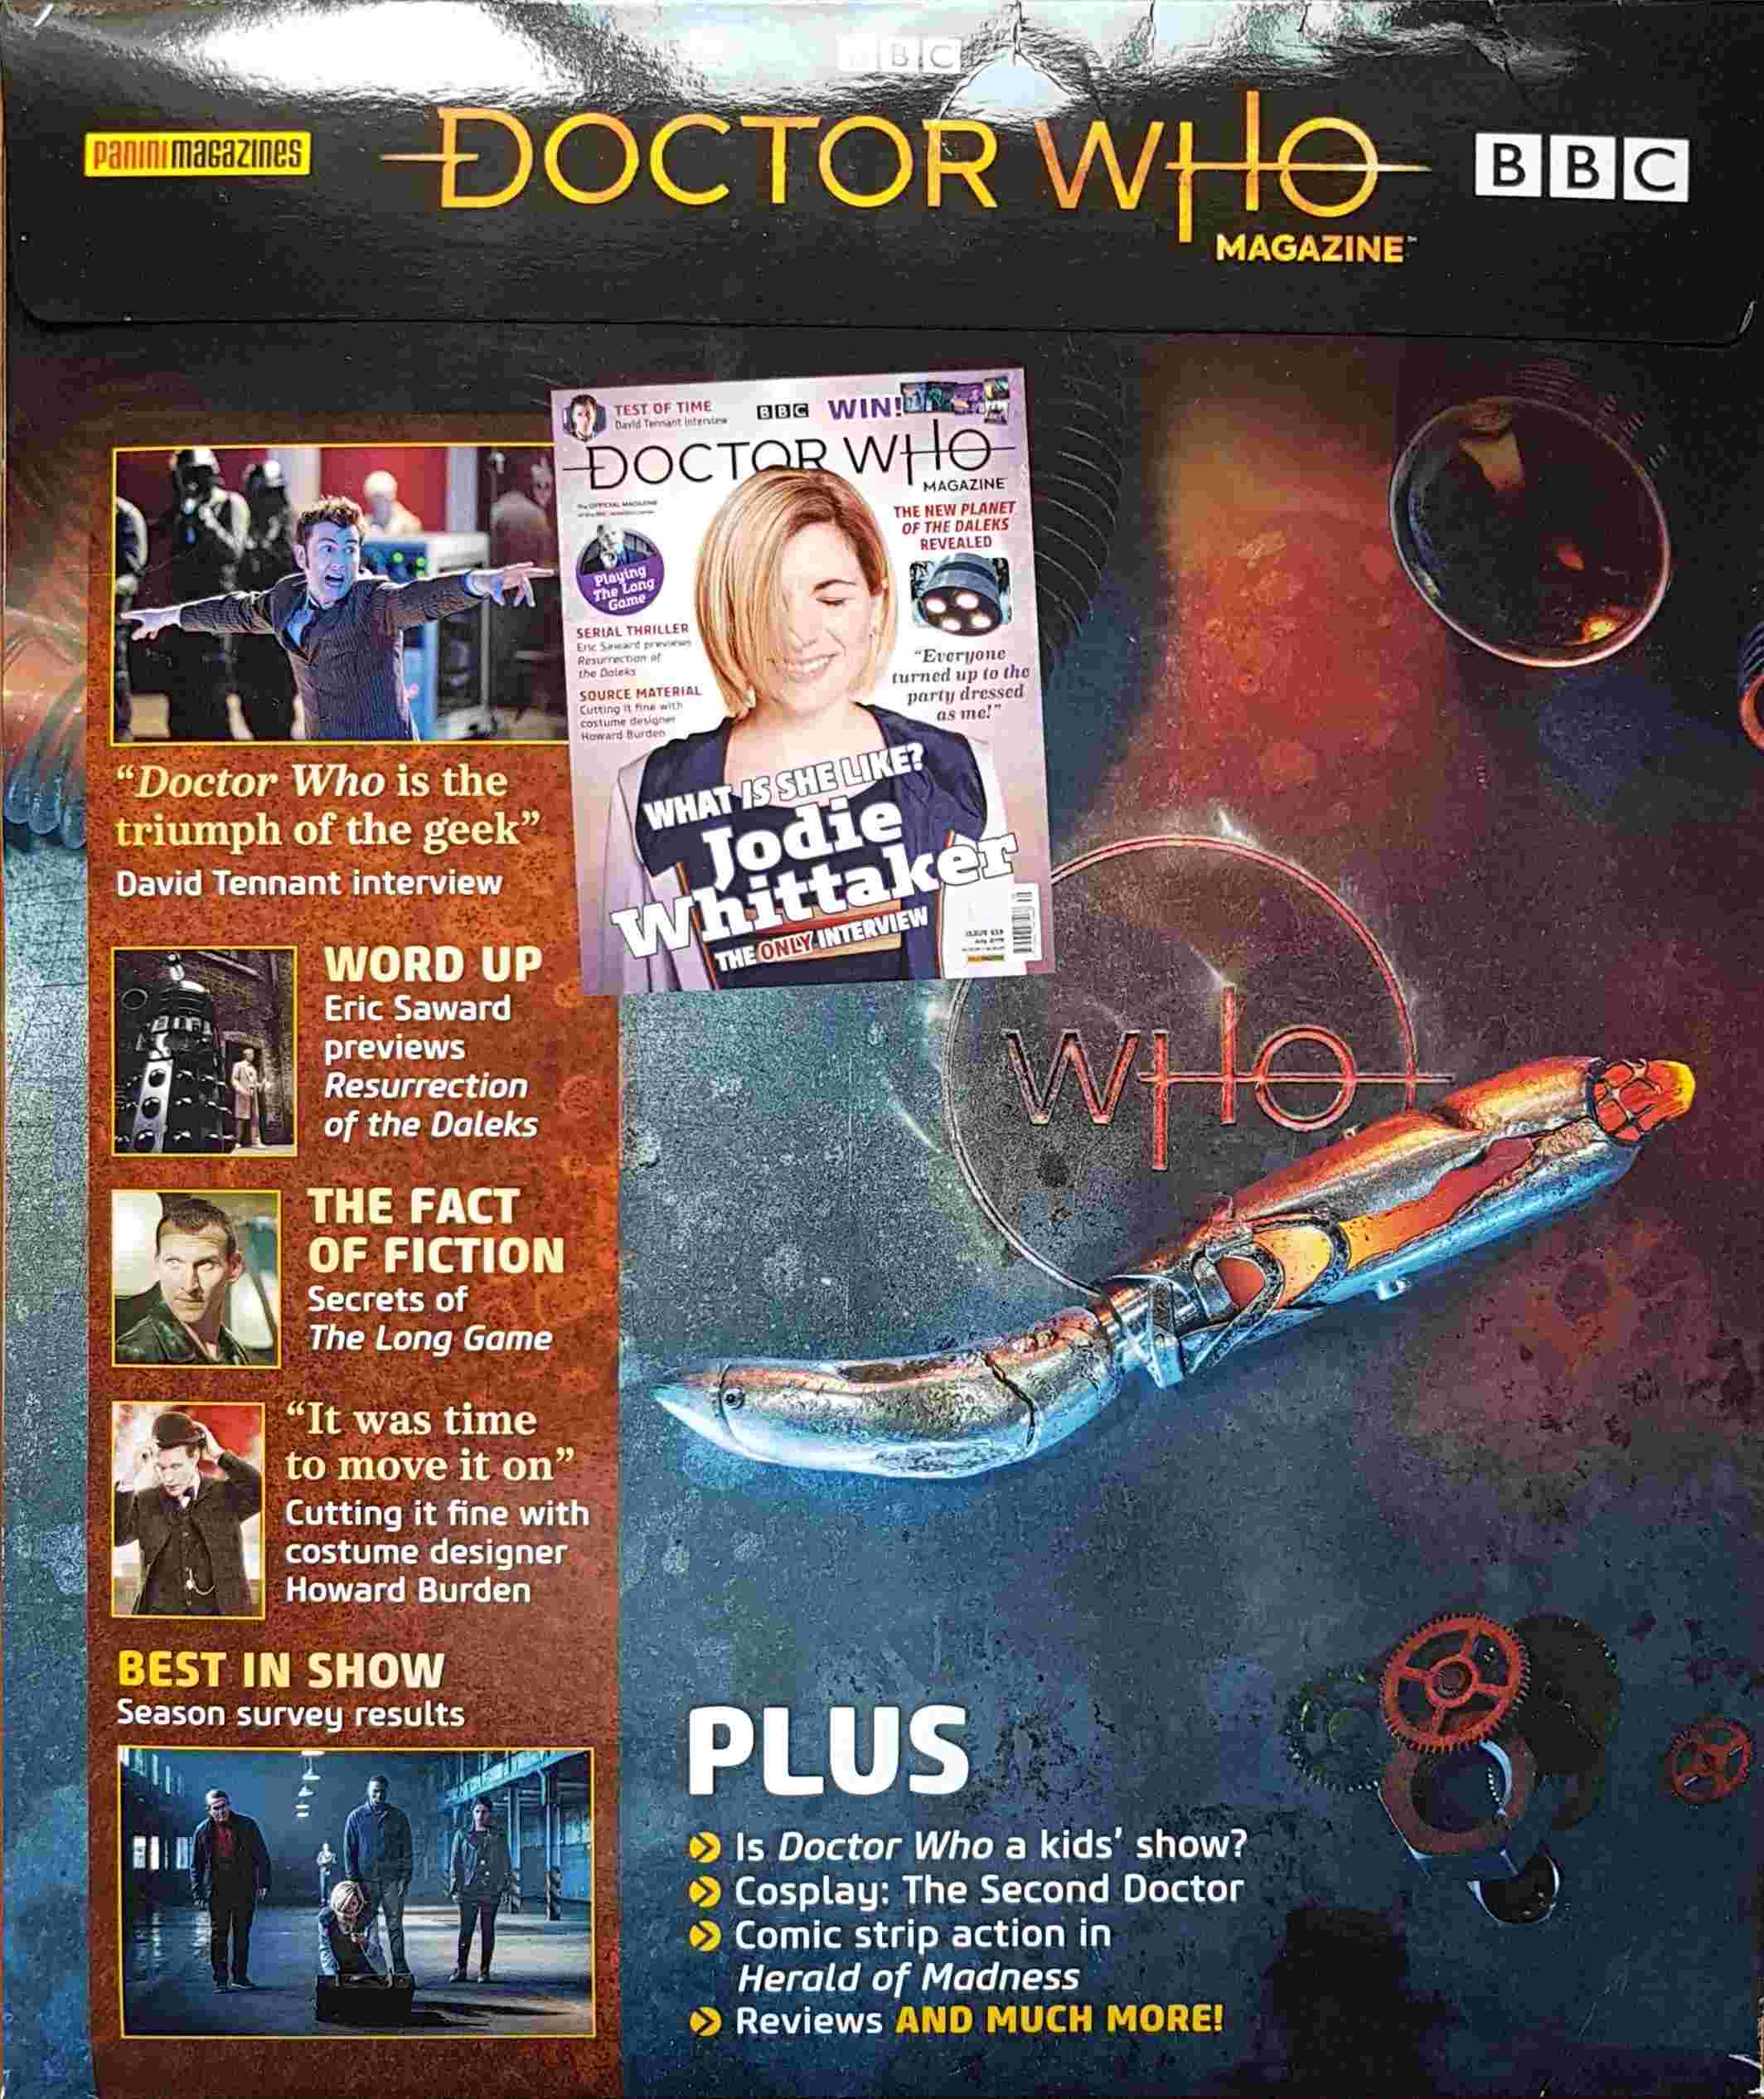 Picture of 5 010791 874006 02 Doctor Who magazine - Issue 539 by artist Various from the BBC records and Tapes library